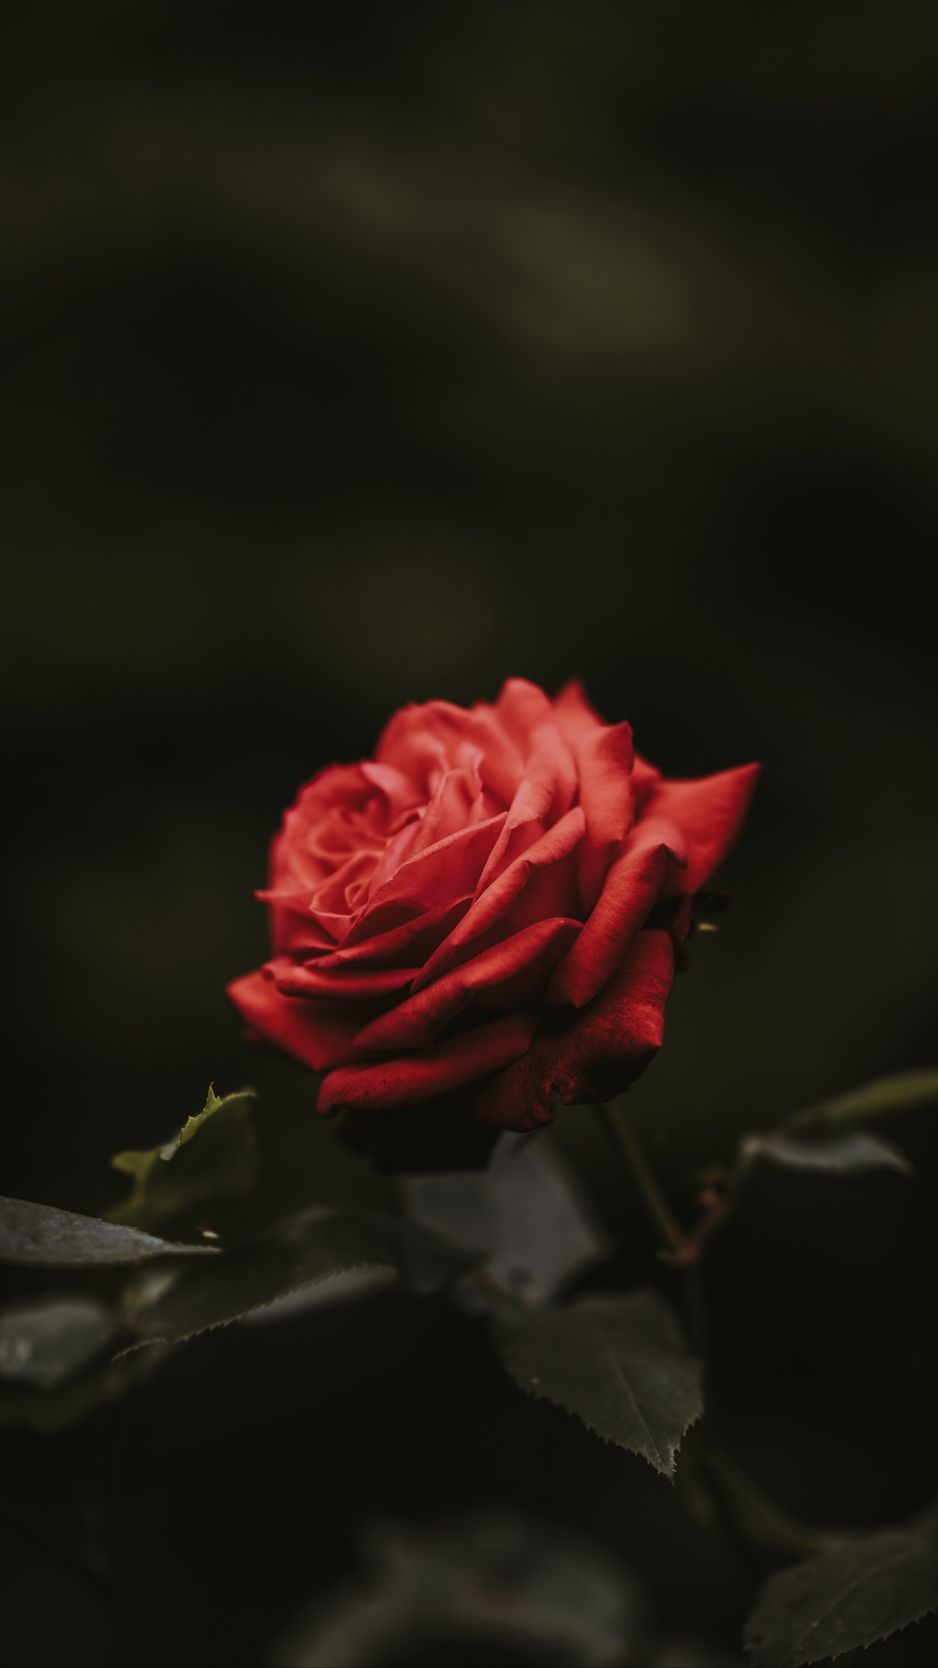 Red Roses Iphone Wallpapers